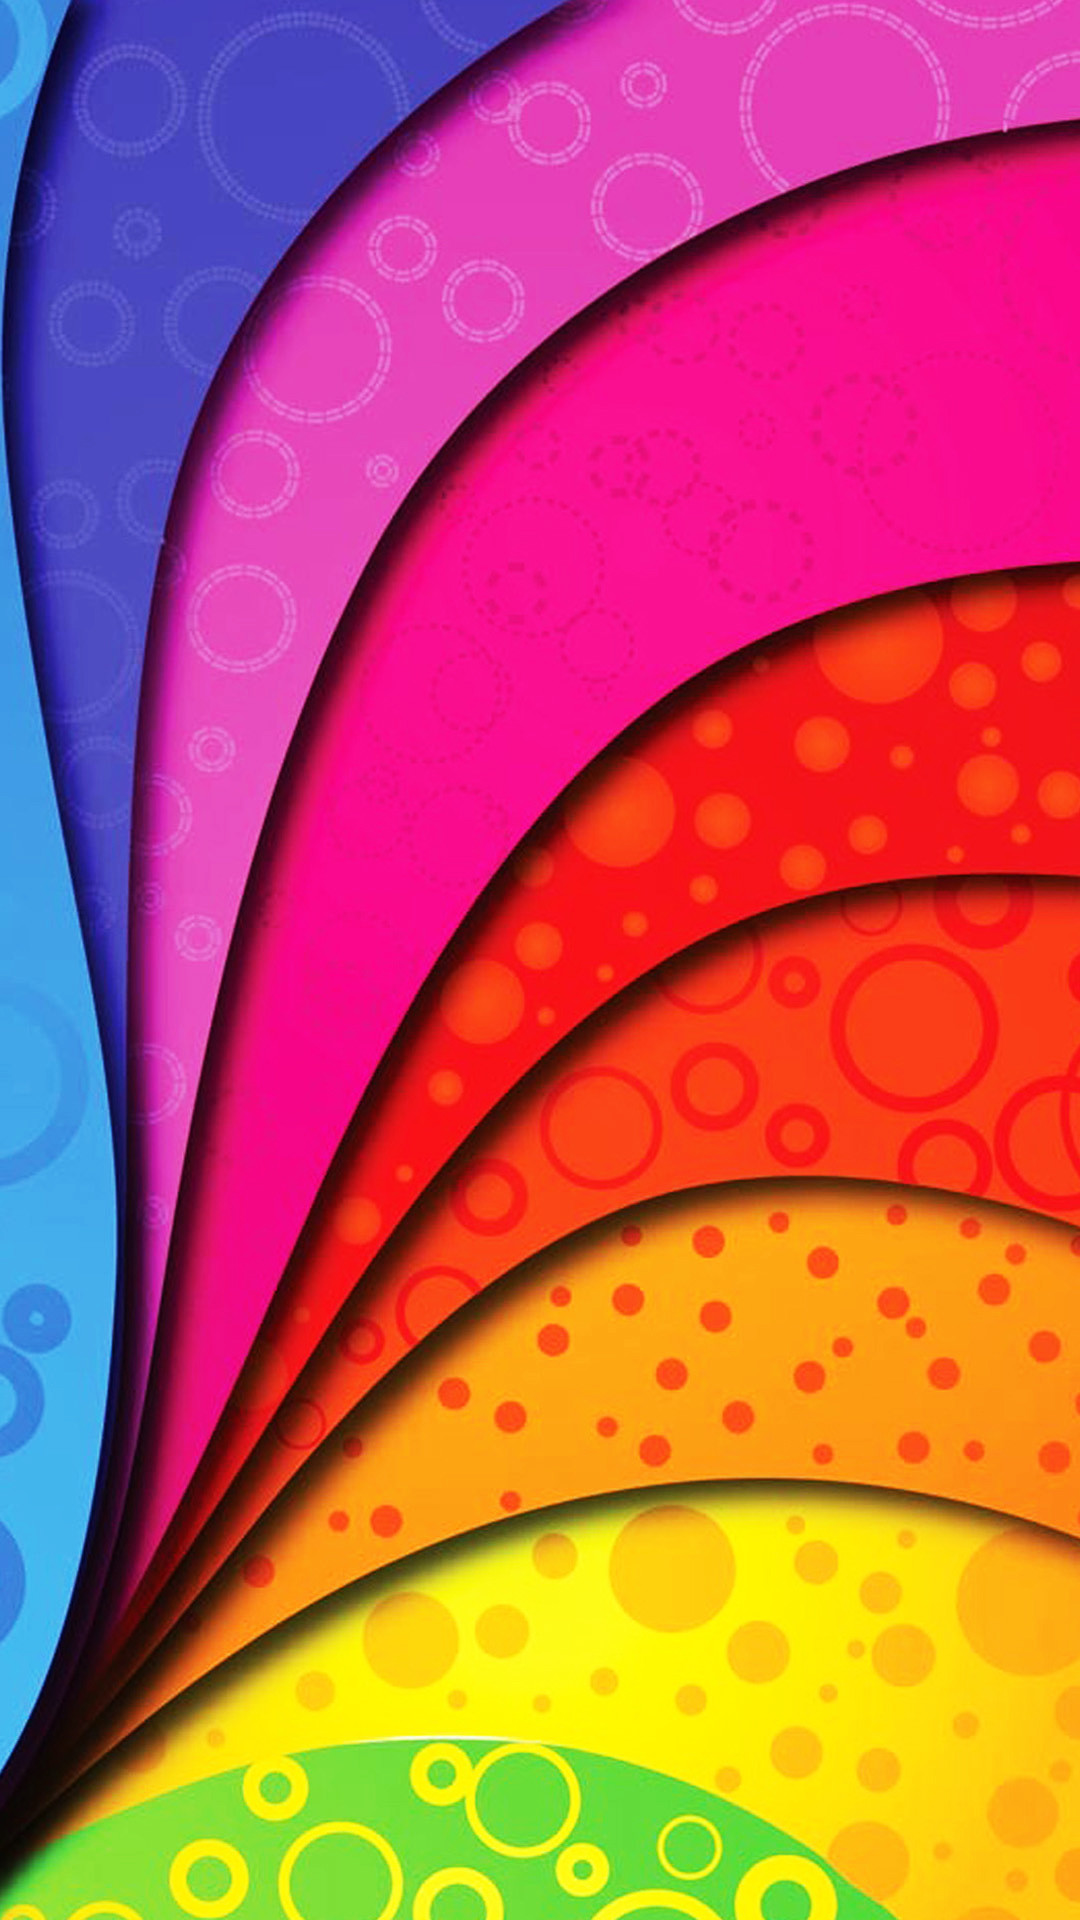 1080x1920 Colorful Swirl Rainbow Dots Android Wallpaper ...